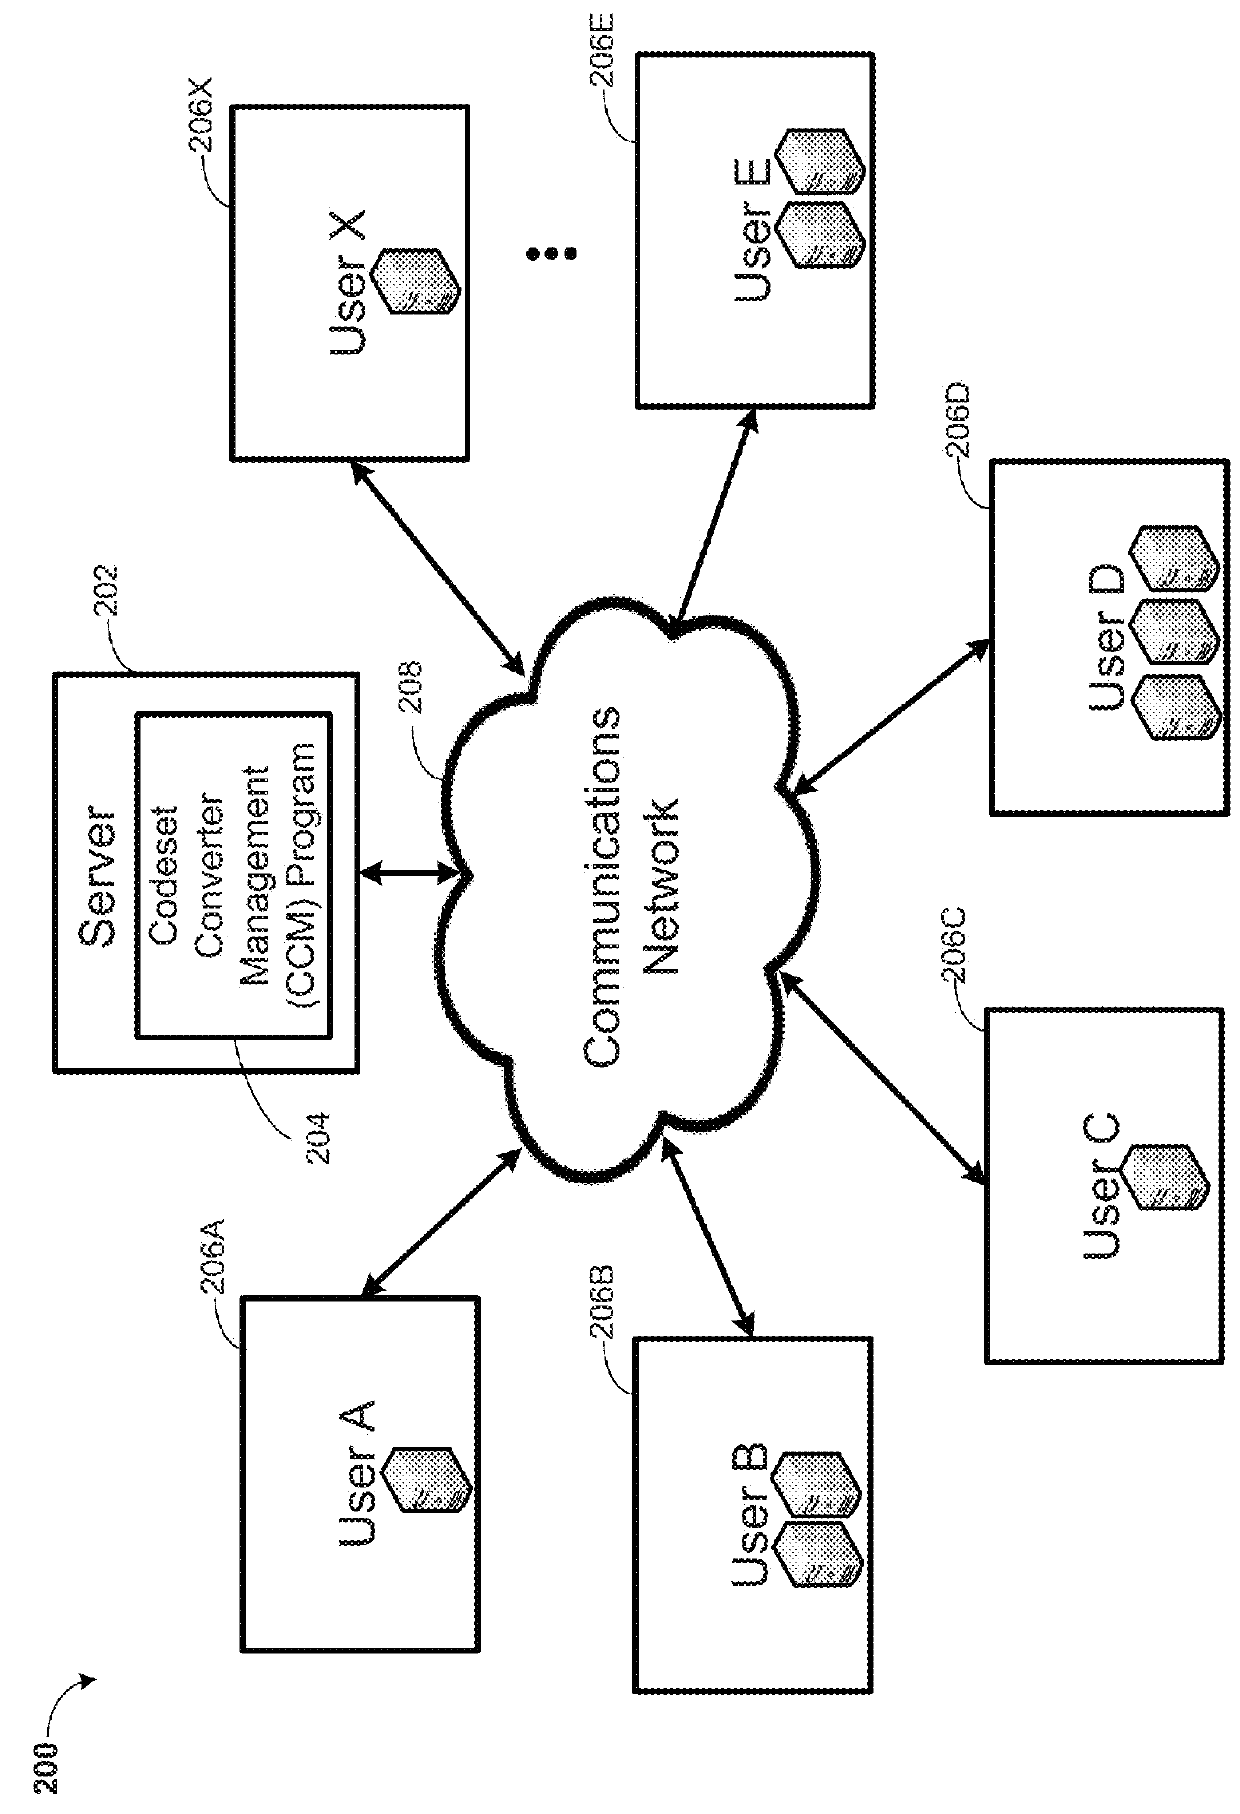 Managing codeset converter usage over a communications network